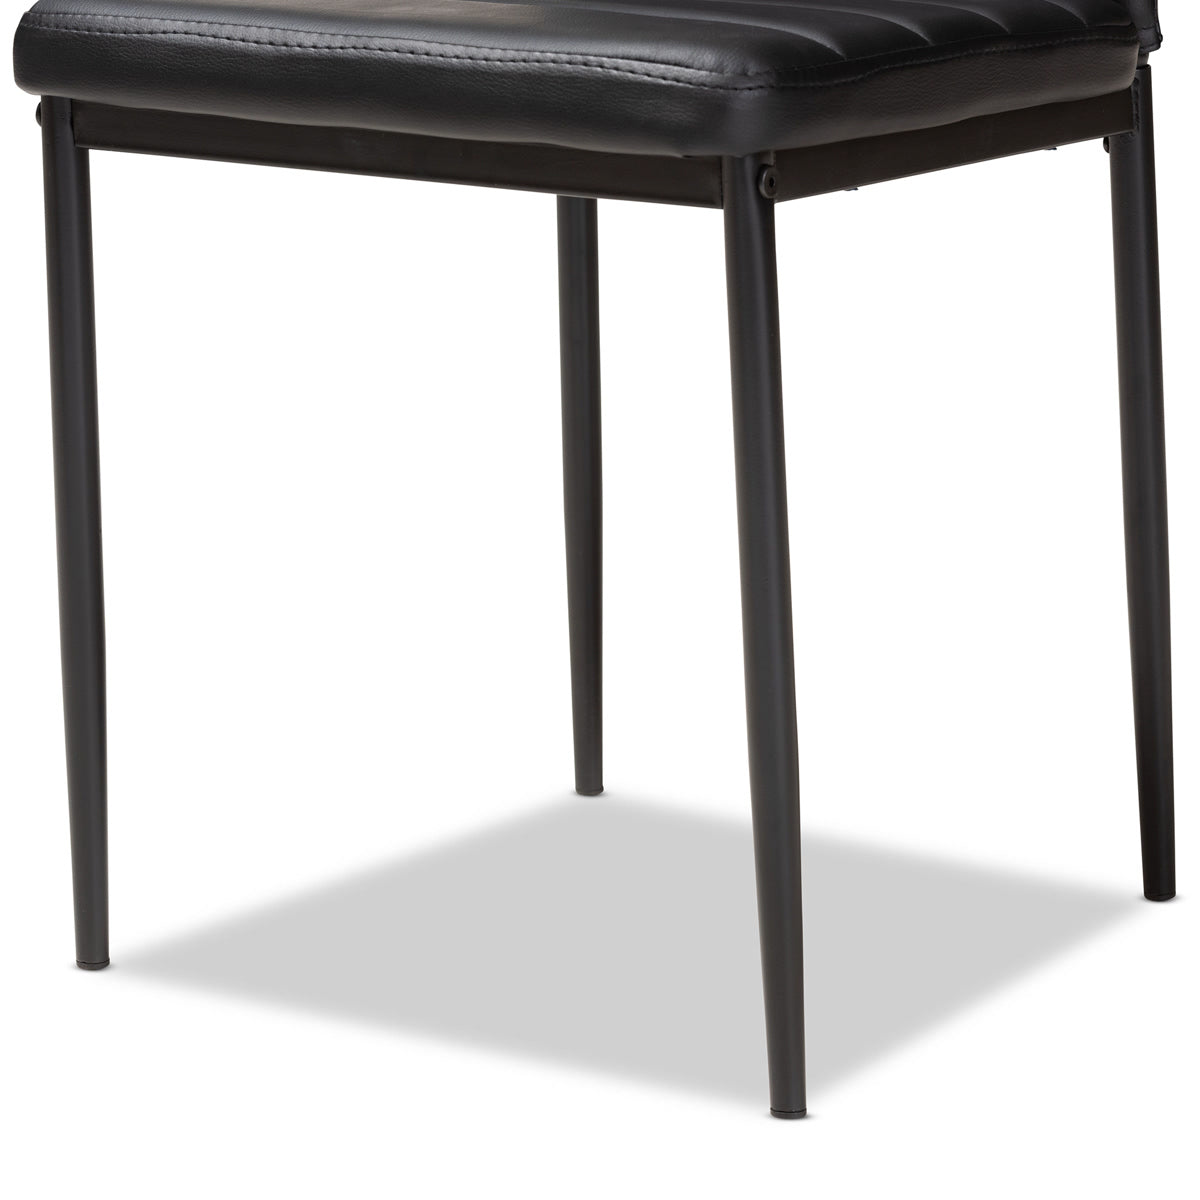 Baxton Studio Armand Modern and Contemporary Black Faux Leather Upholstered Dining Chair (Set of 4) Baxton Studio-dining chair-Minimal And Modern - 2